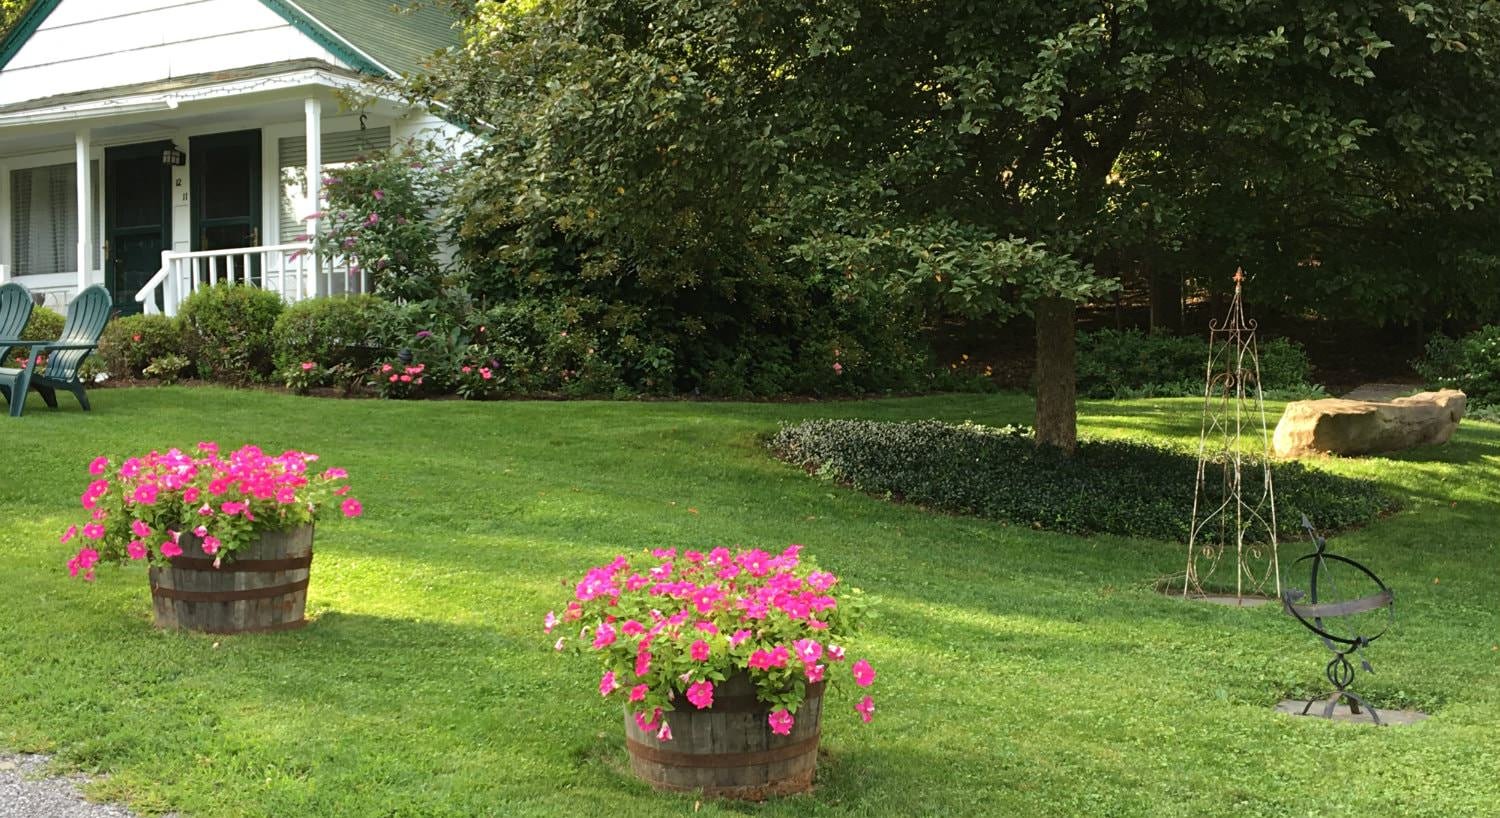 Green grassy lawn with wood buckets of pink flowers, a large greeen tree and a white cottage in the background